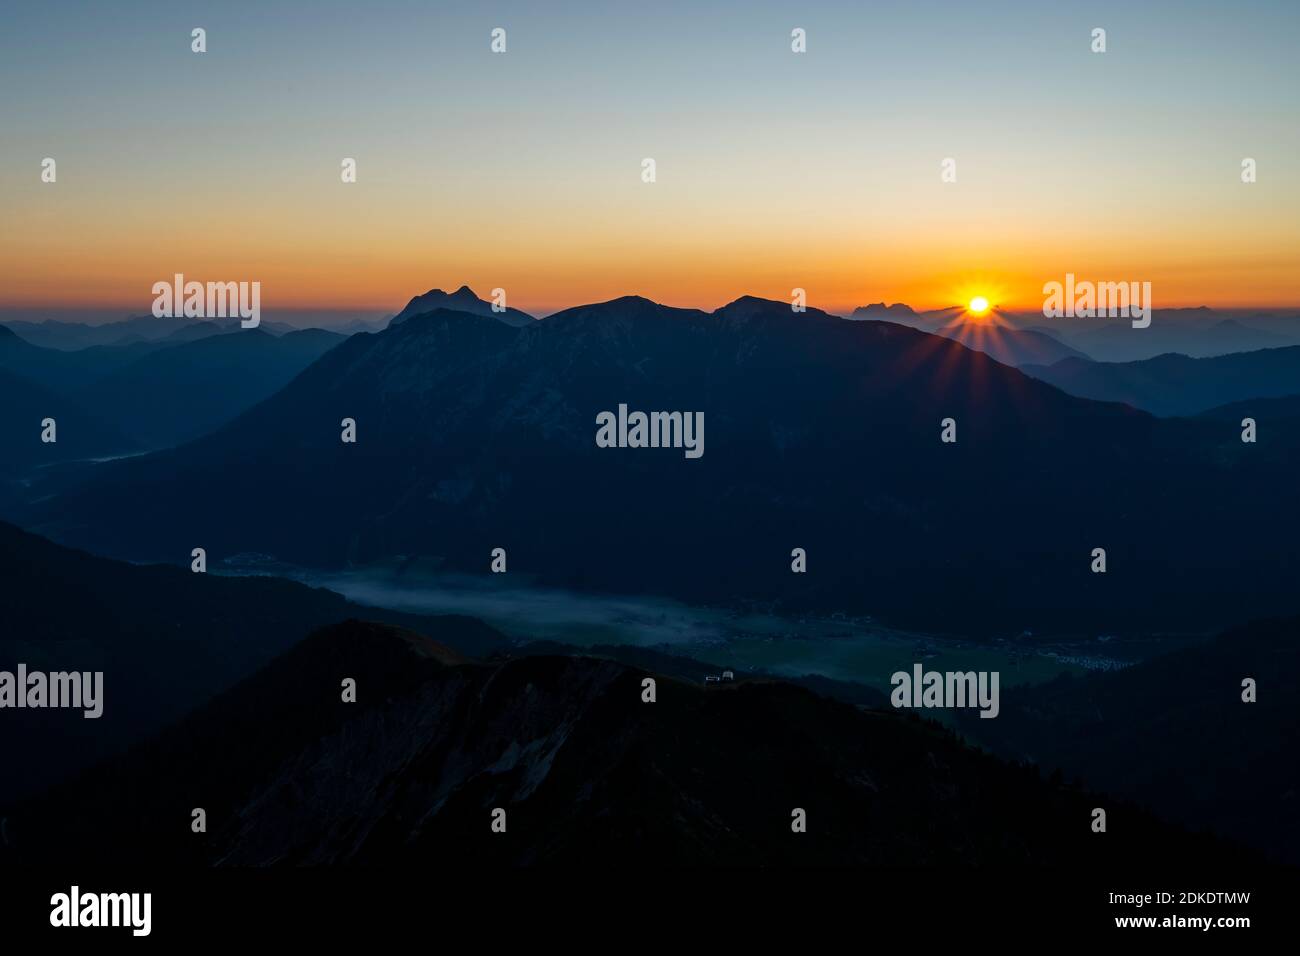 Sonnenstern am Unnütz and Guffert, above Lake Achensee, in the Achenkirch valley in Tyrol, shrouded in darkness, photographed from the Karwendel mountain range under a blue sky. Stock Photo